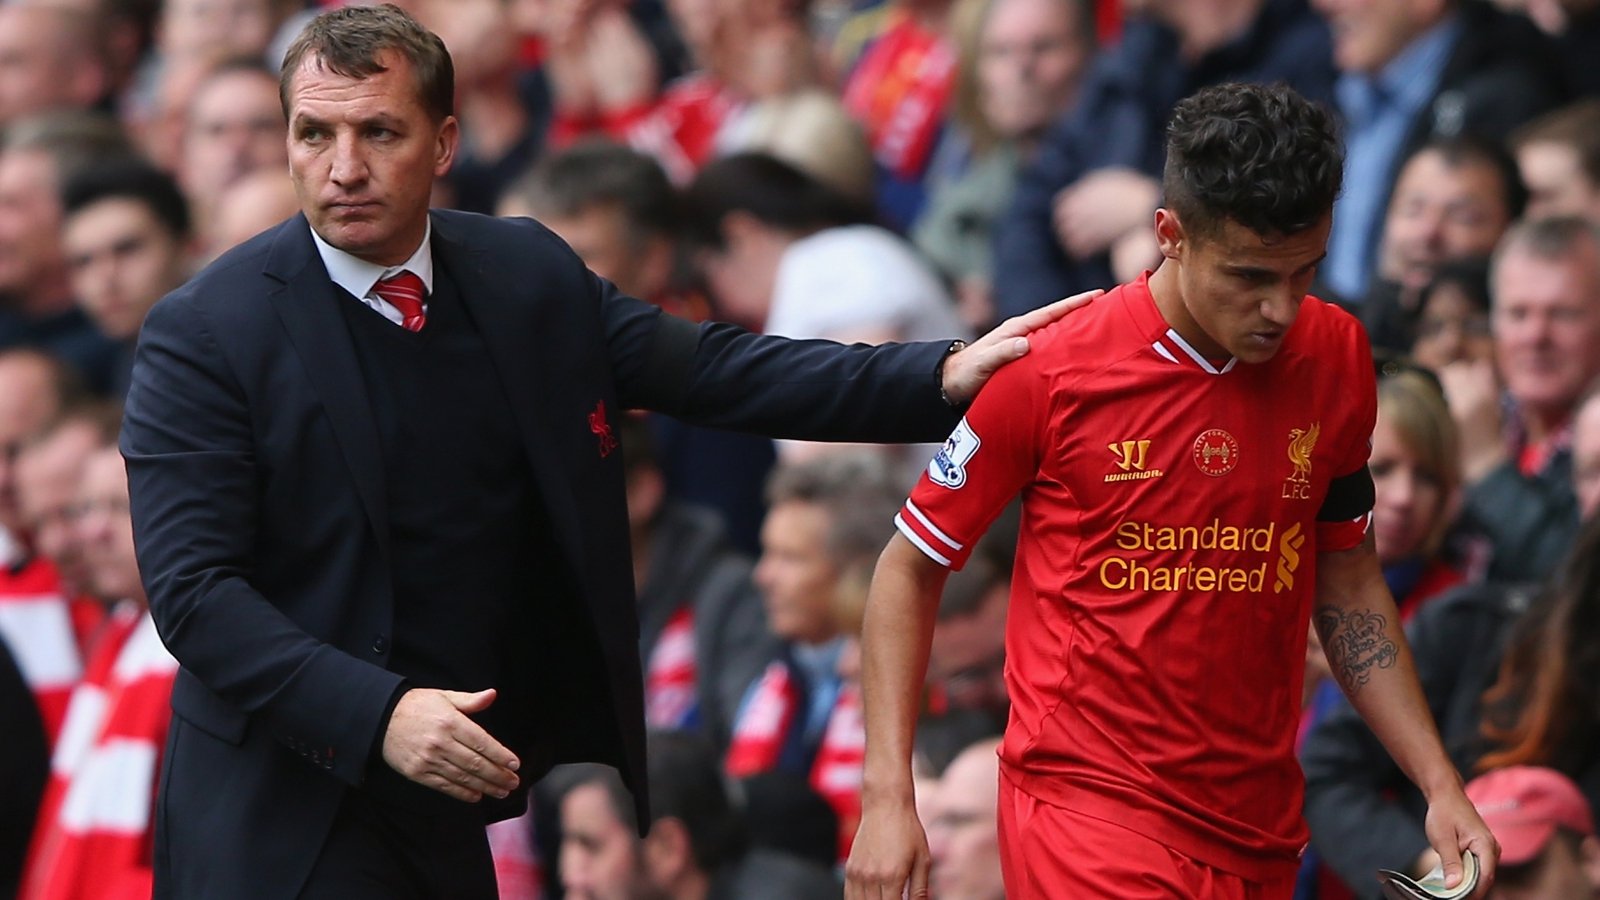 Liverpool in the driving seat on Coutinho says Rodgers